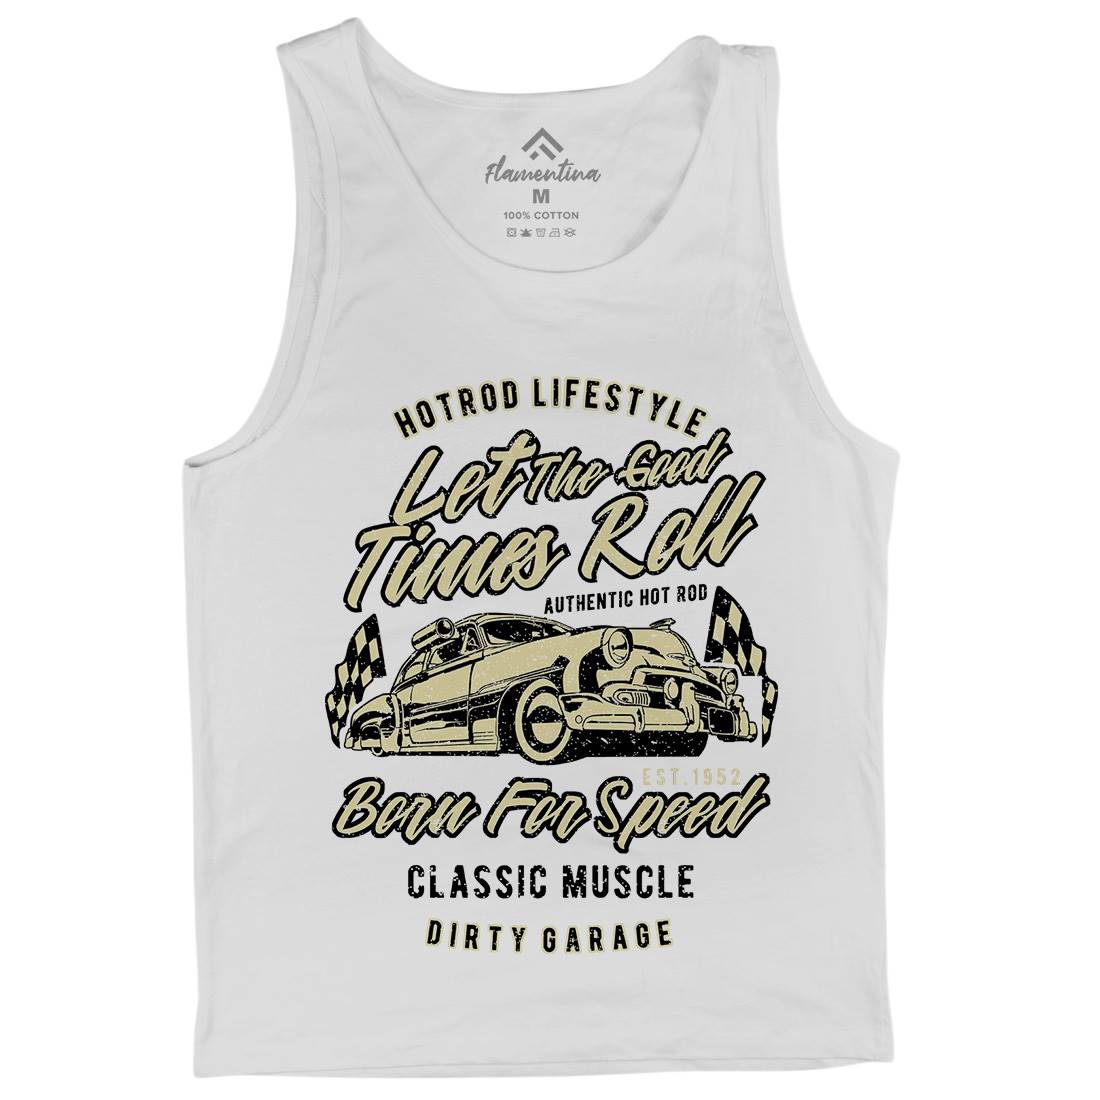 Let The Good Times Roll Mens Tank Top Vest Cars A705